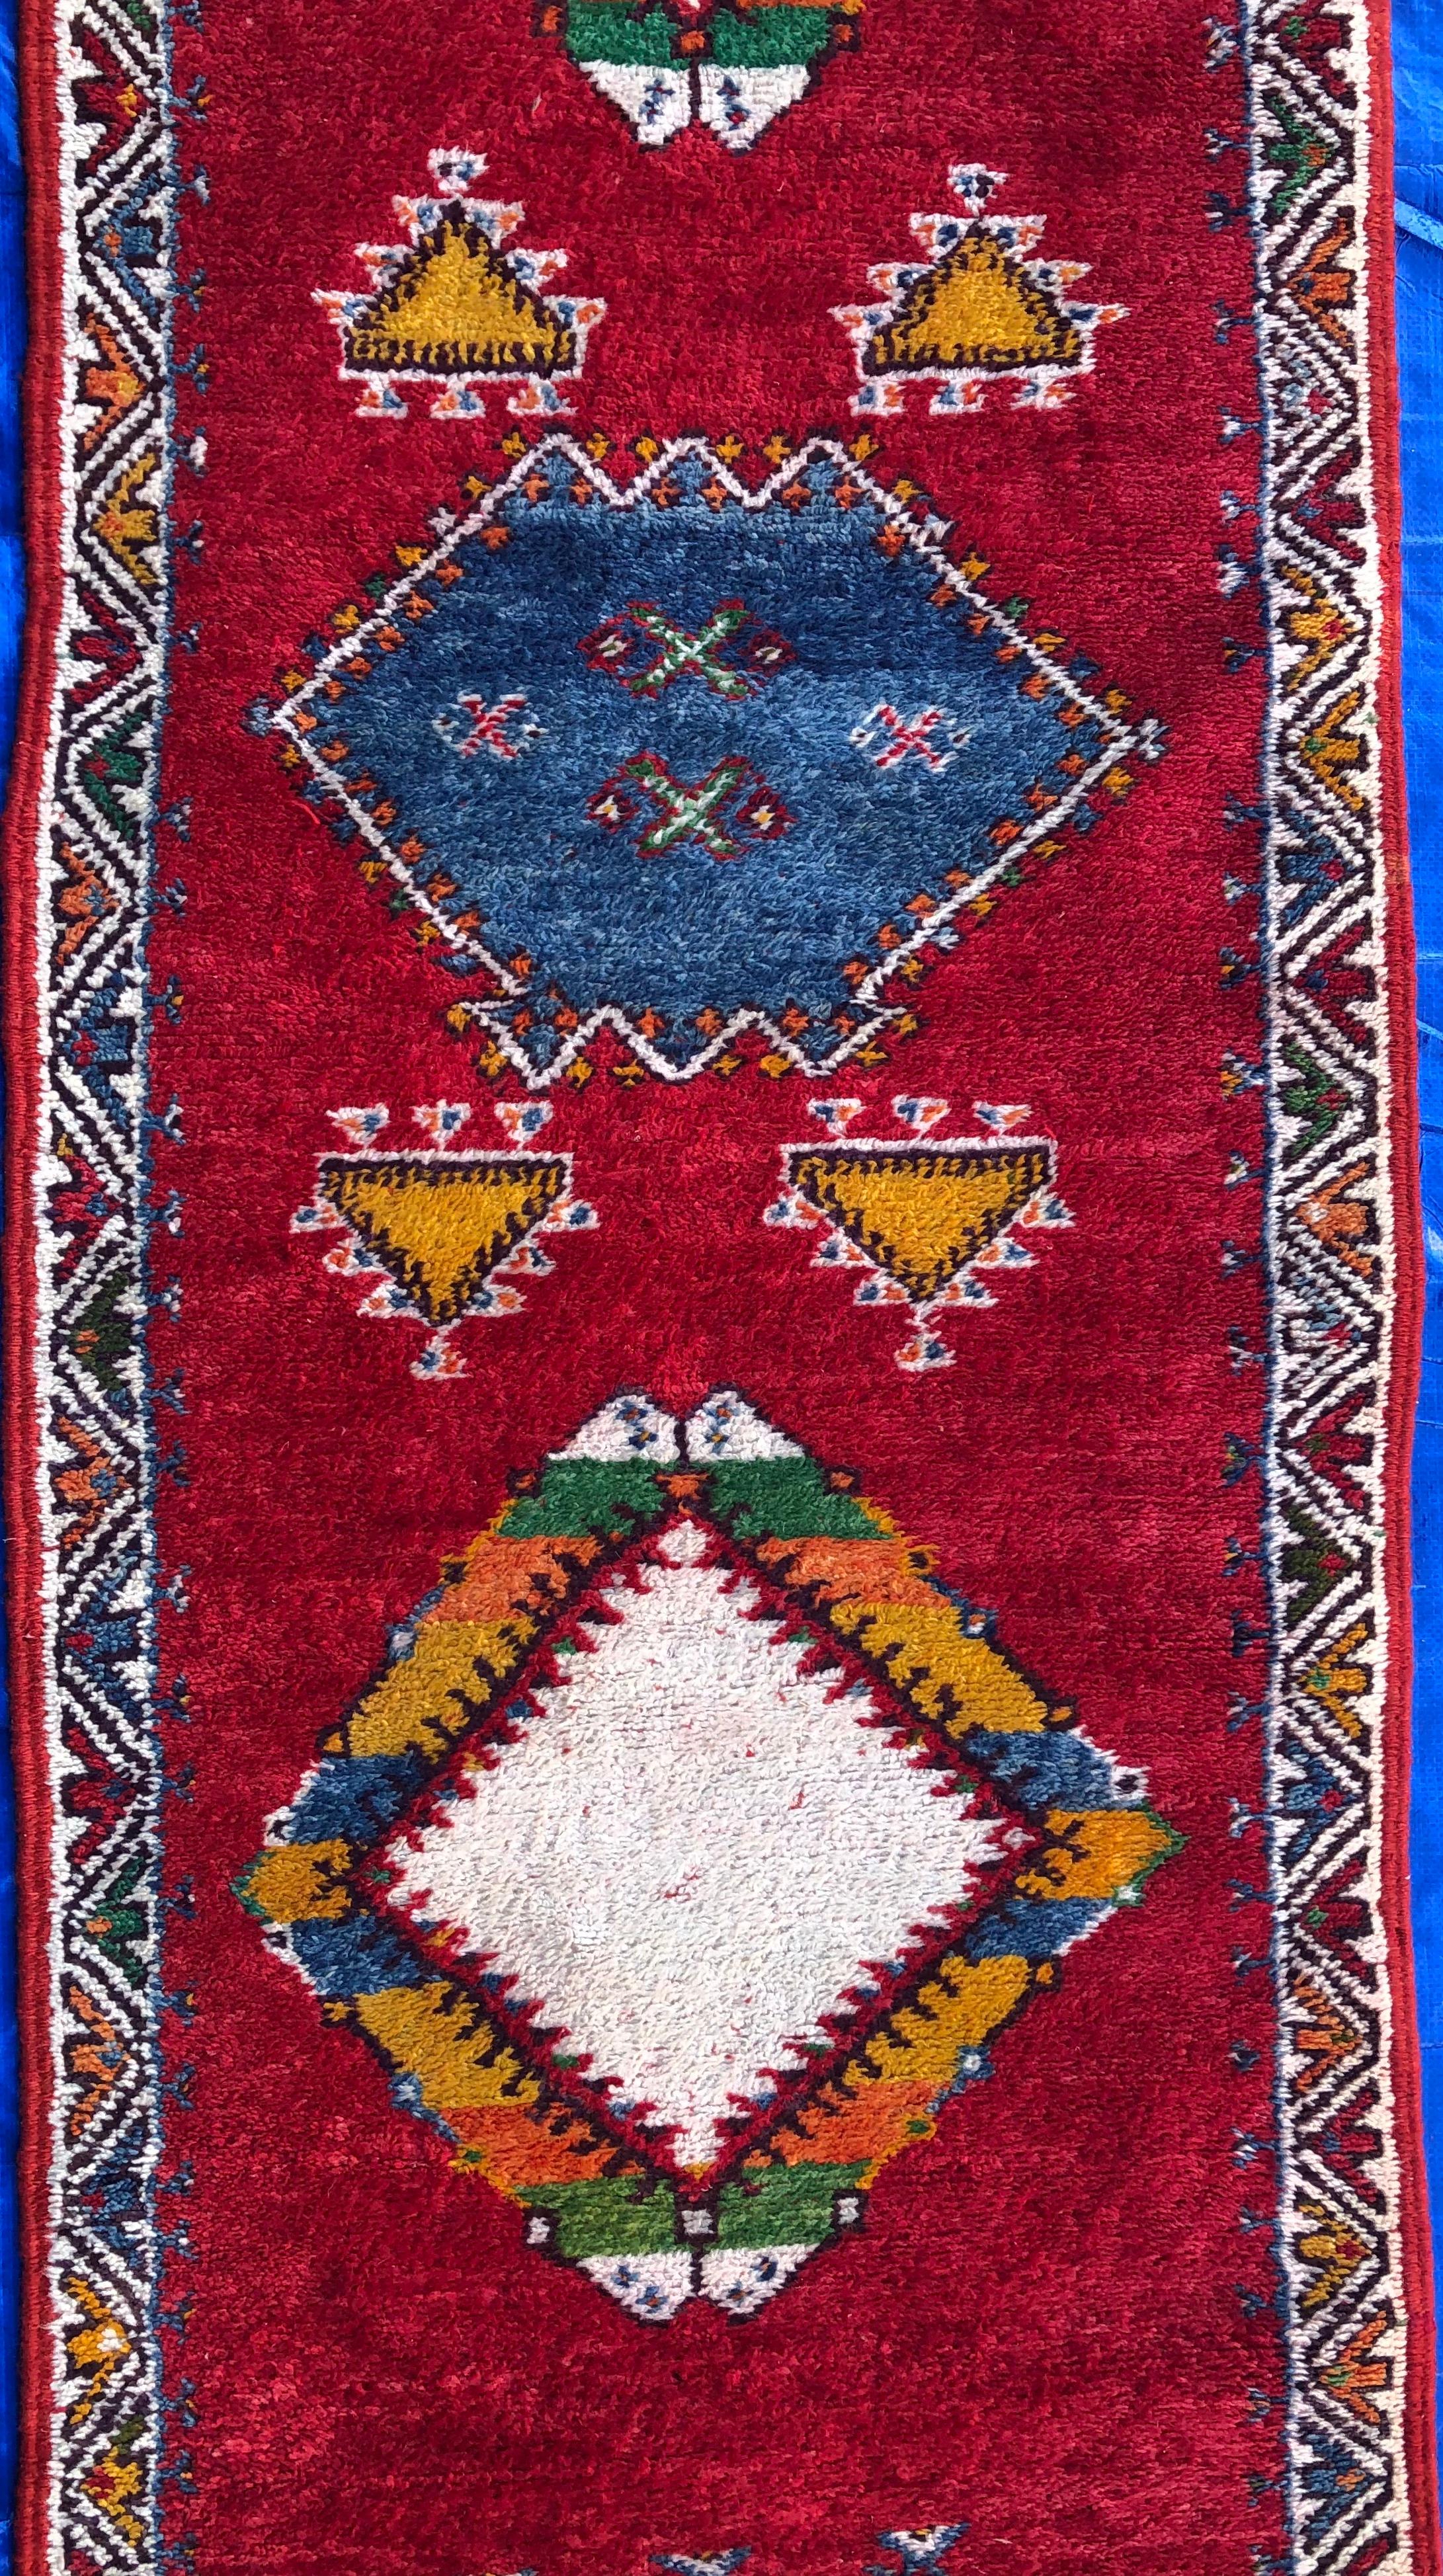 Vintage Moroccan Tribal Rug or Runner Vibrant Red and Accentuating Blue & White For Sale 3